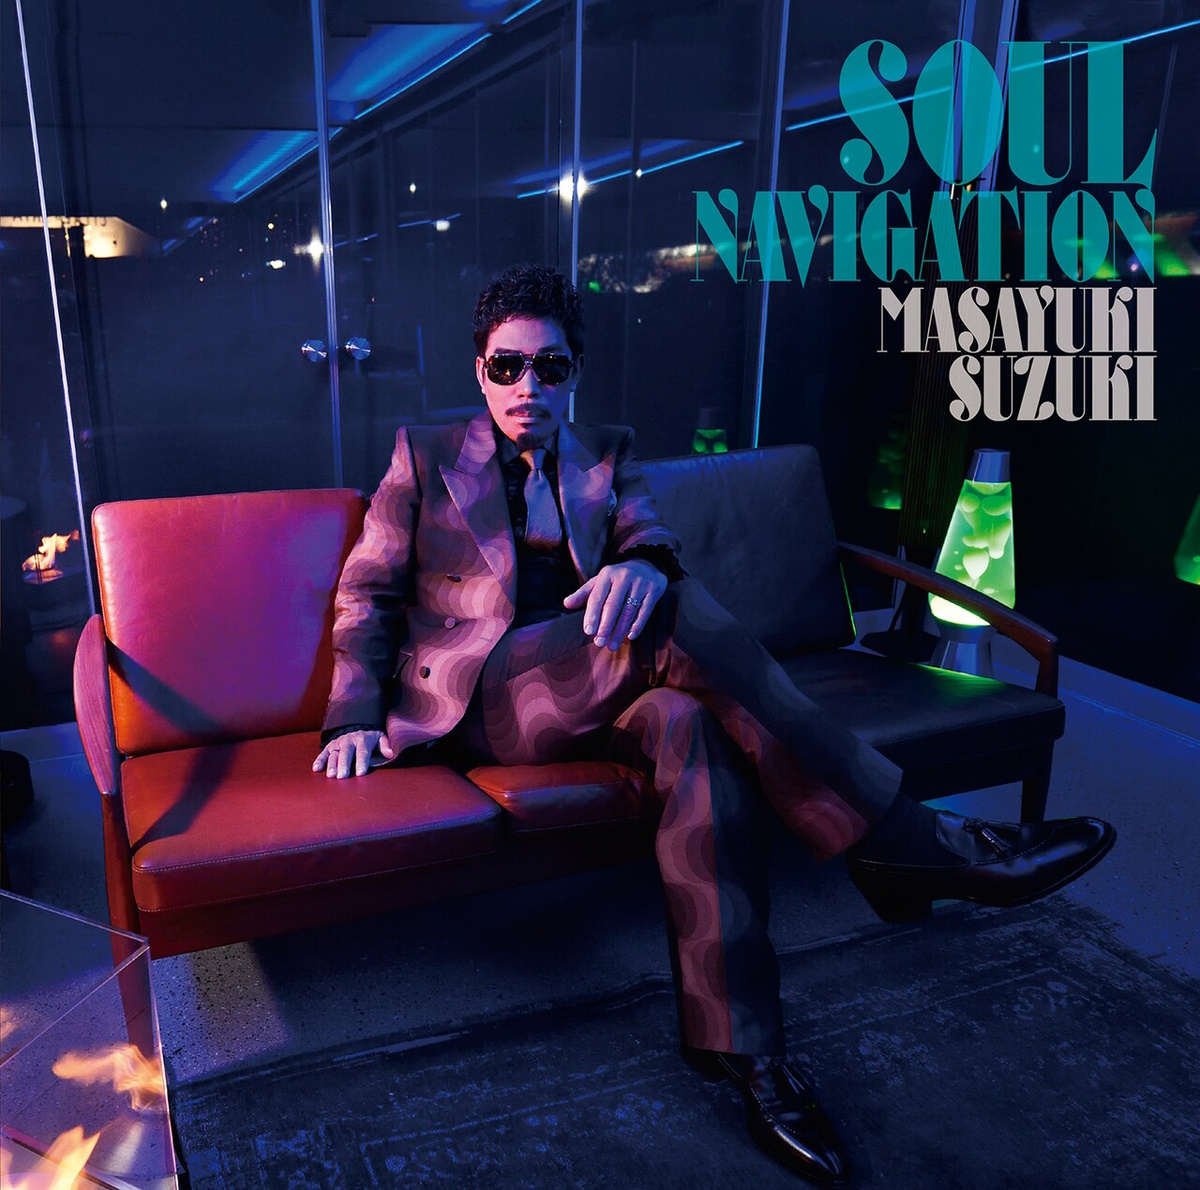 Cover art for『Masayuki Suzuki - EveryDay EveryTime』from the release『SOUL NAVIGATION